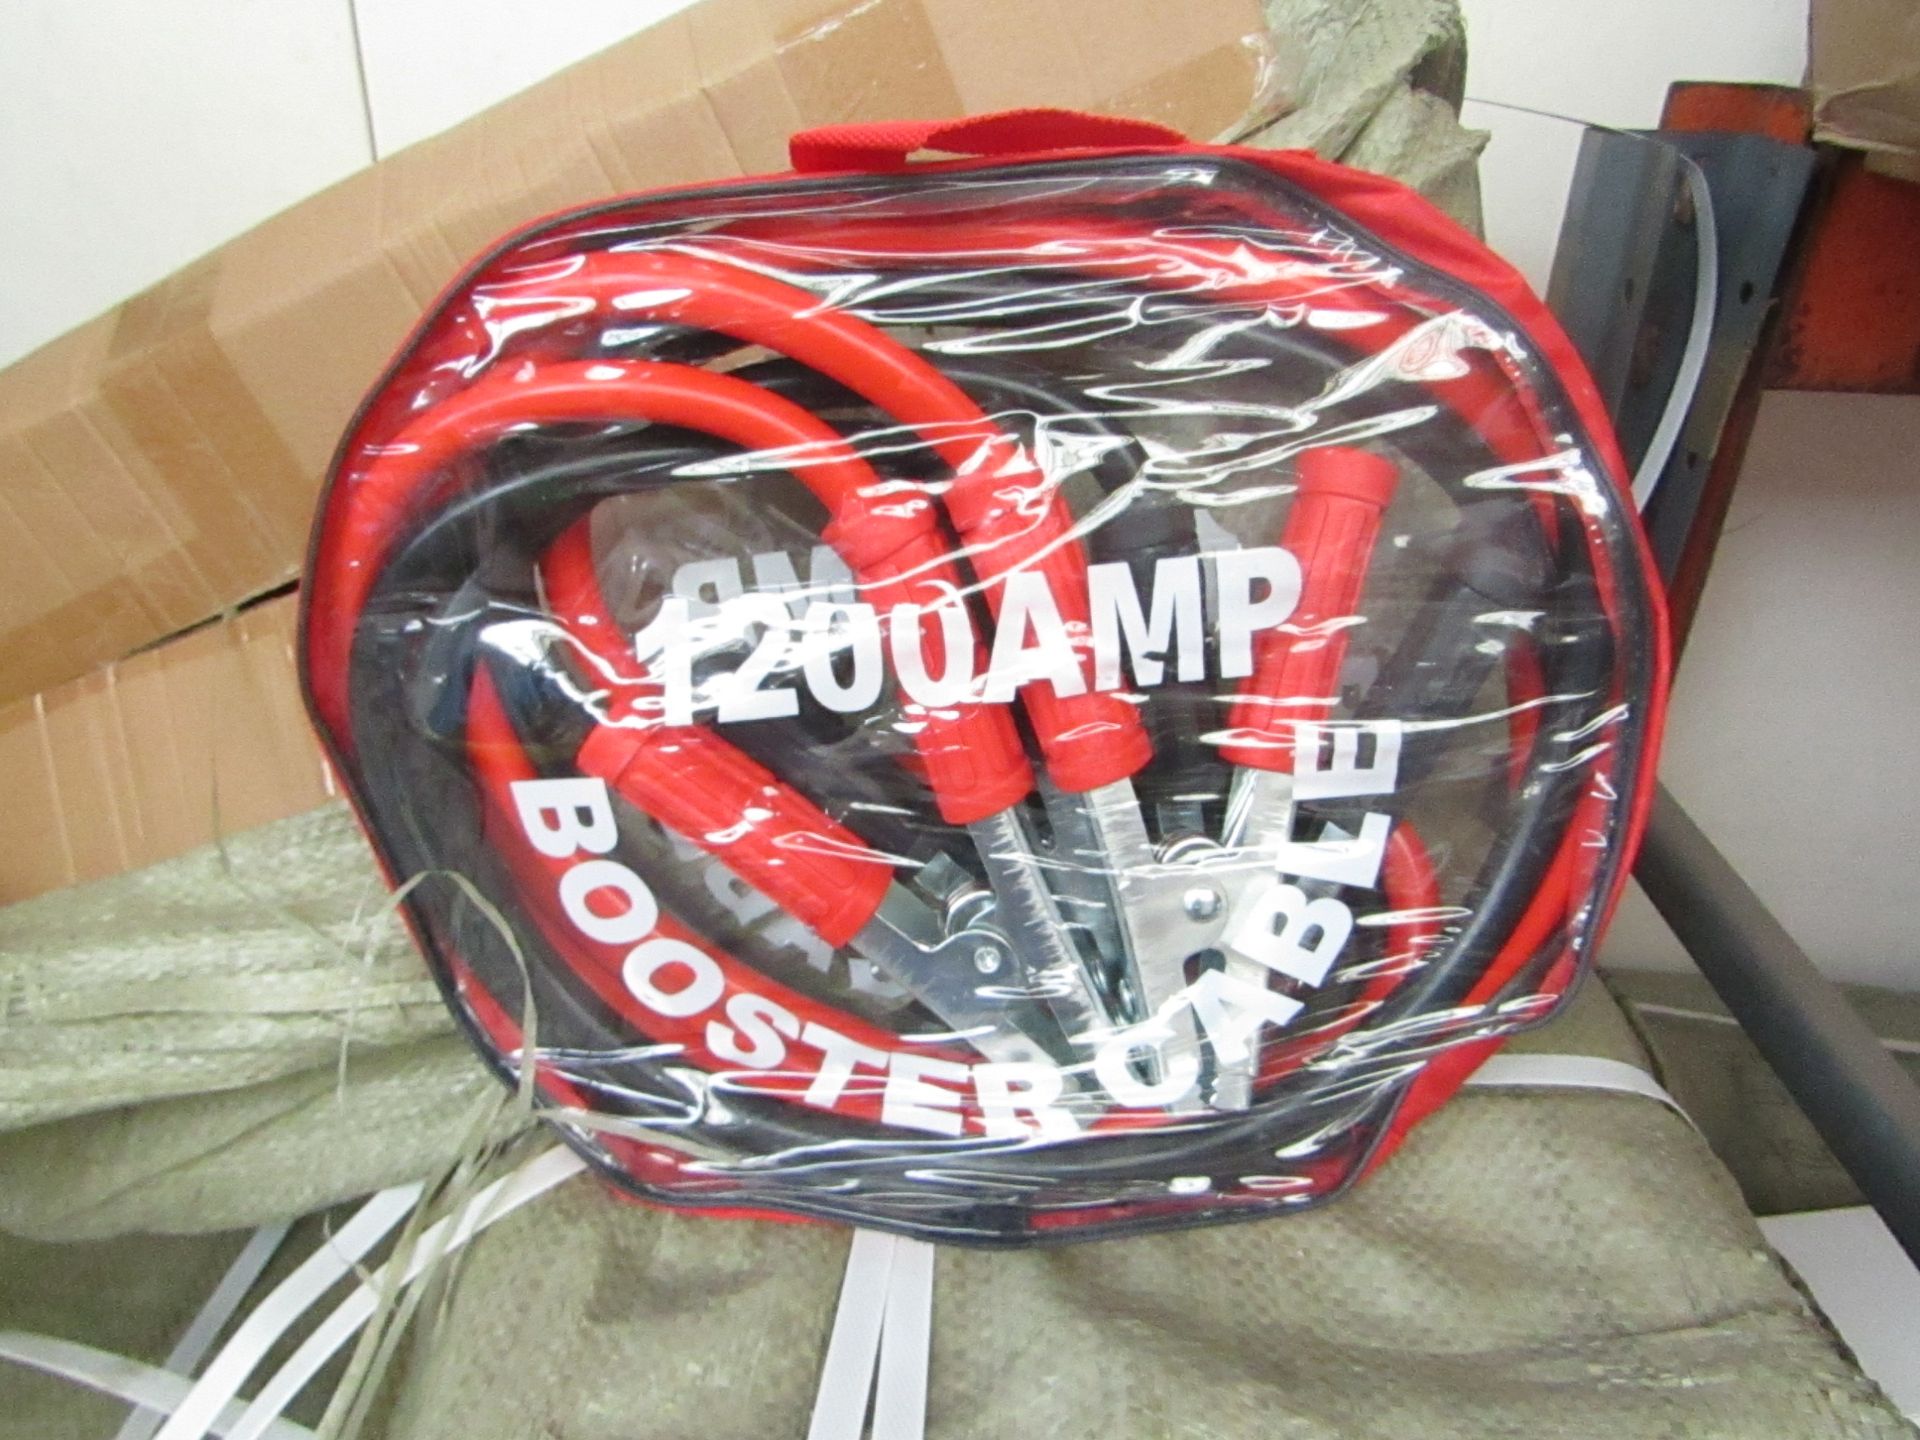 1200amp booster cable in carry bag, used